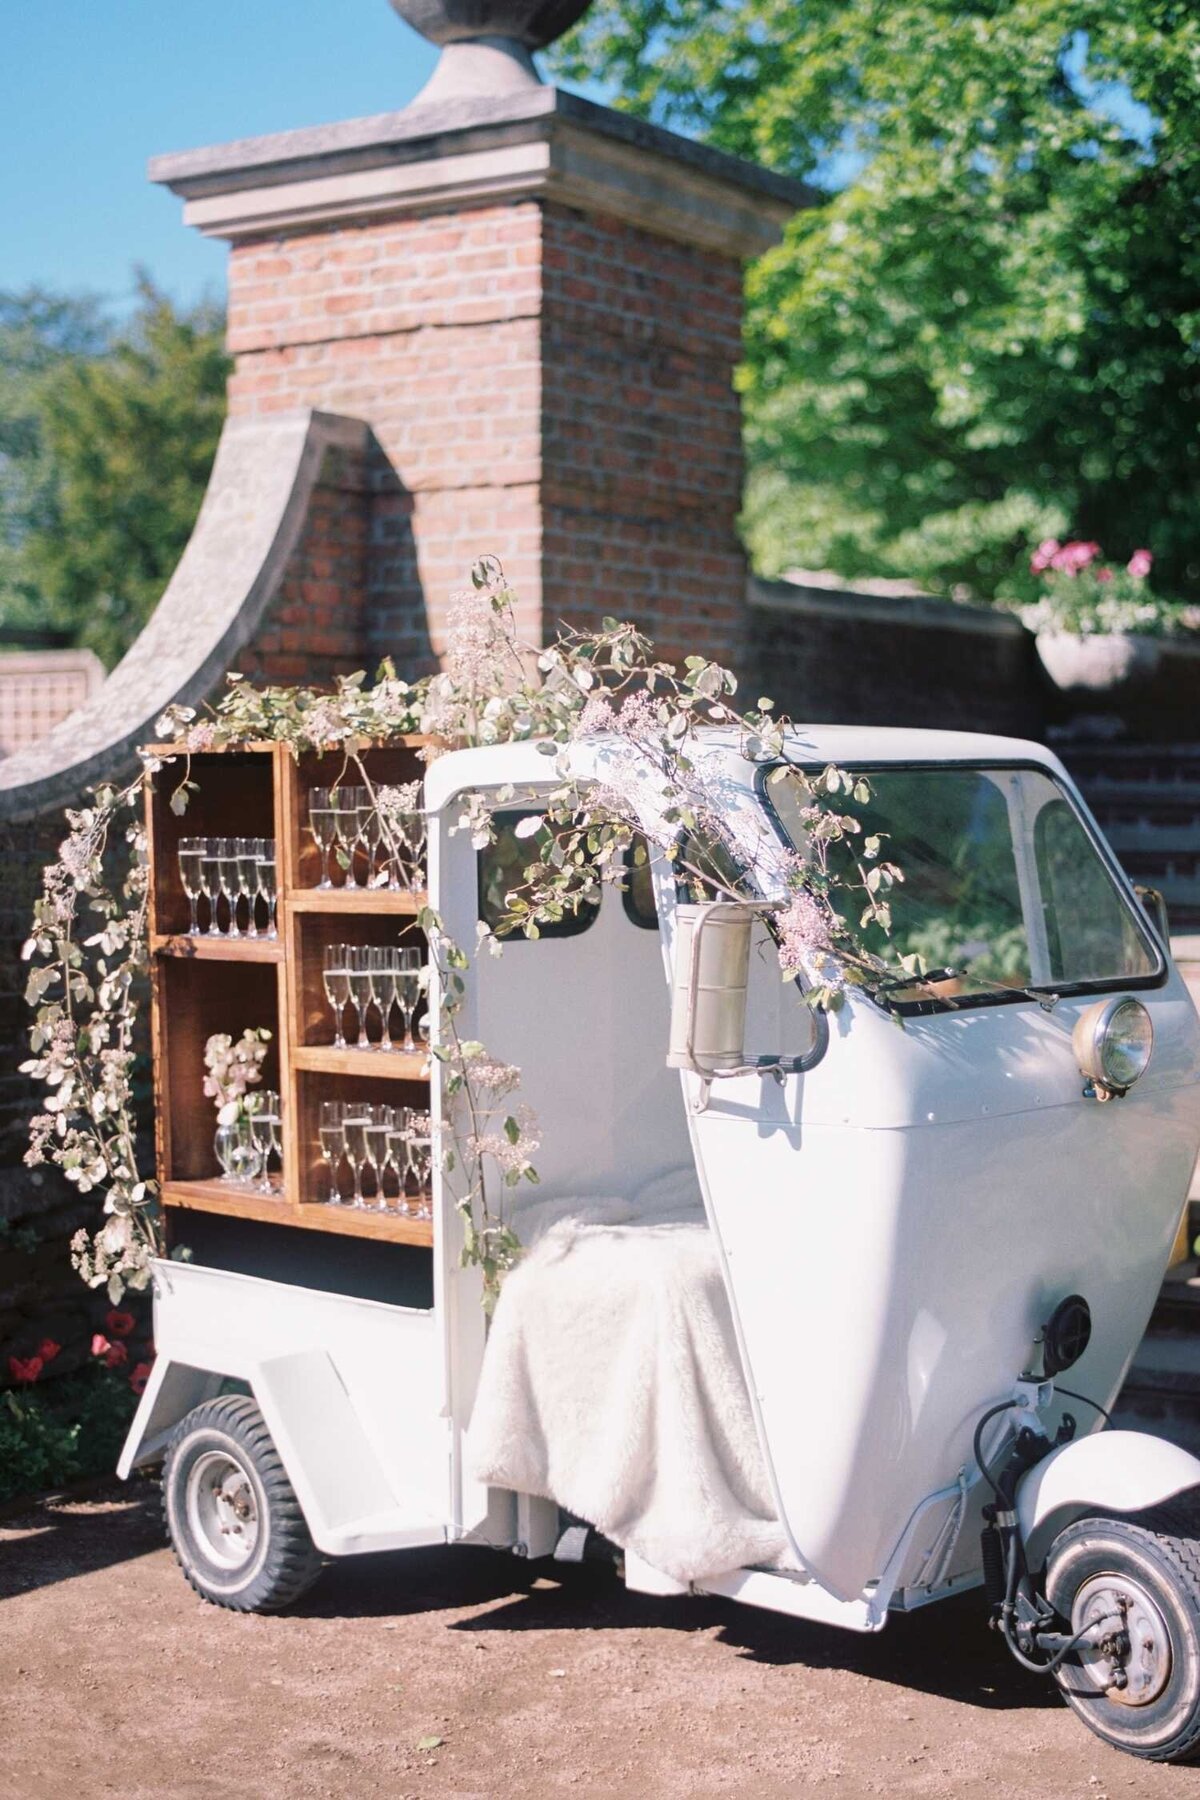 Champagne Truck for a Guest Surprise at Luxury Chicago North Shore Garden Wedding Venue